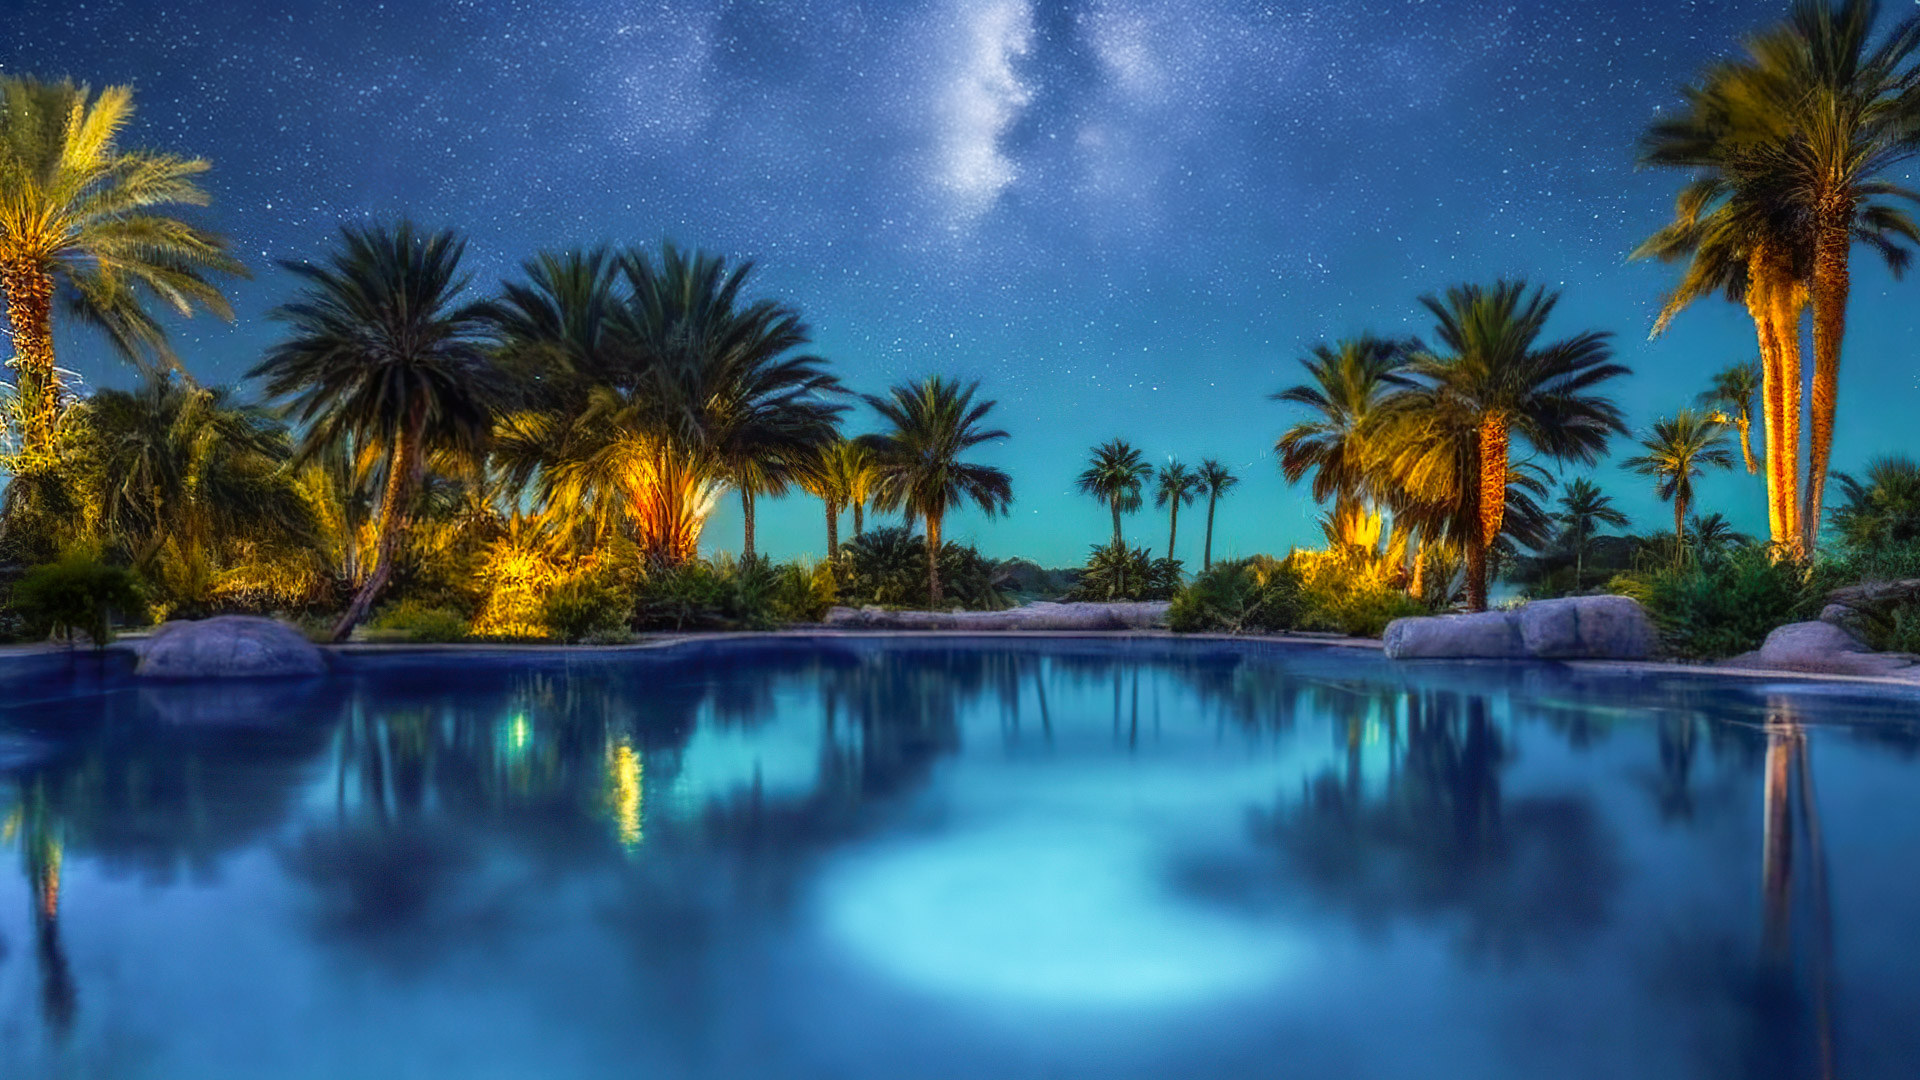 Get lost in the serenity of our high-resolution nature wallpaper in 1080p HD, capturing a desert oasis under the Milky Way, where palm trees surround a serene, starry pool.